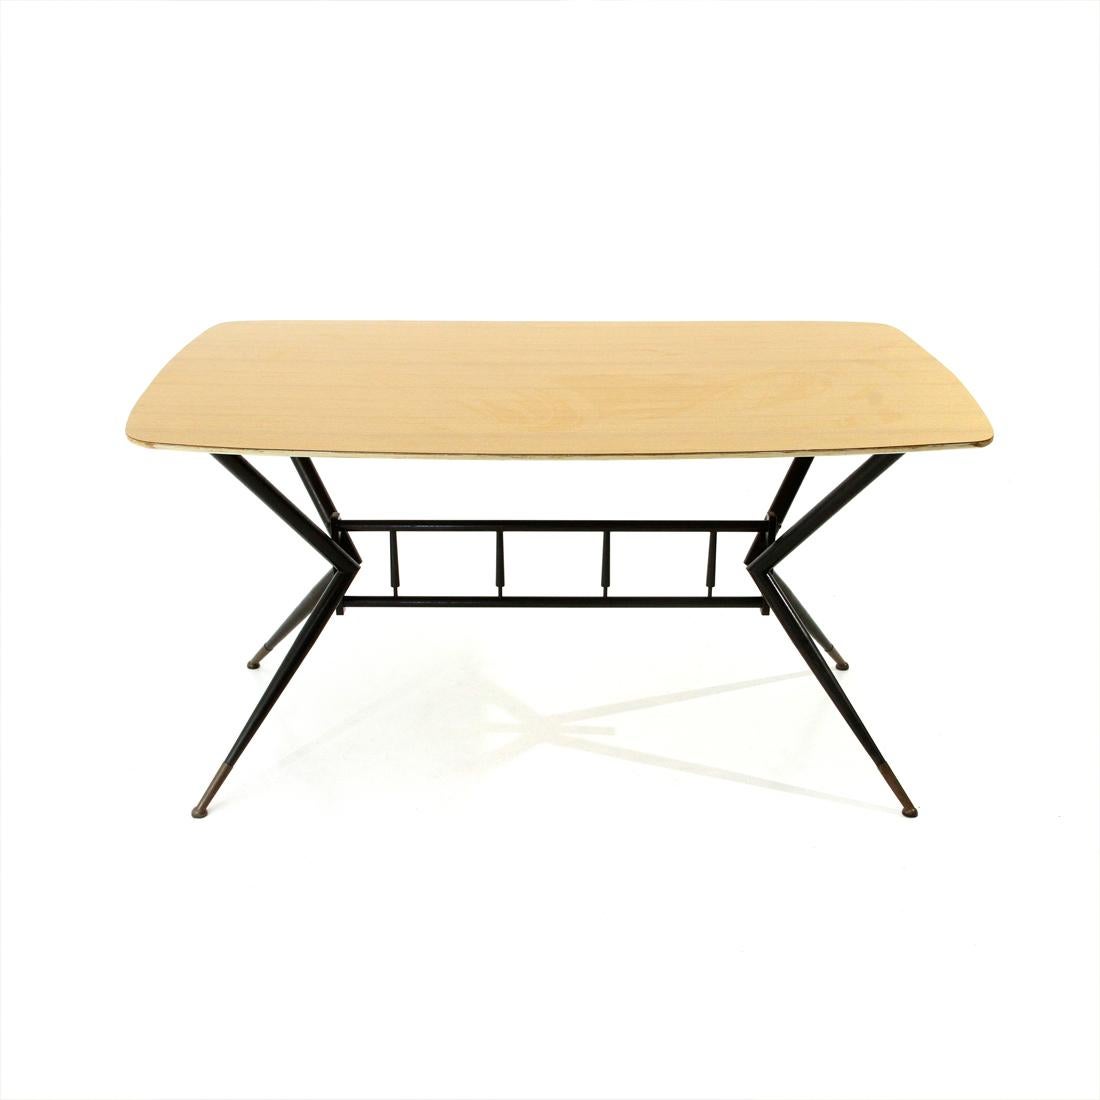 Italian made table produced in the 1950s.
Chipboard top and Formica surface.
Structure in black painted metal.
Brass tips.
Good general conditions, some signs due to normal use over time.

Dimensions: Length 142 cm - Depth 83 cm - Height 73 cm.
 